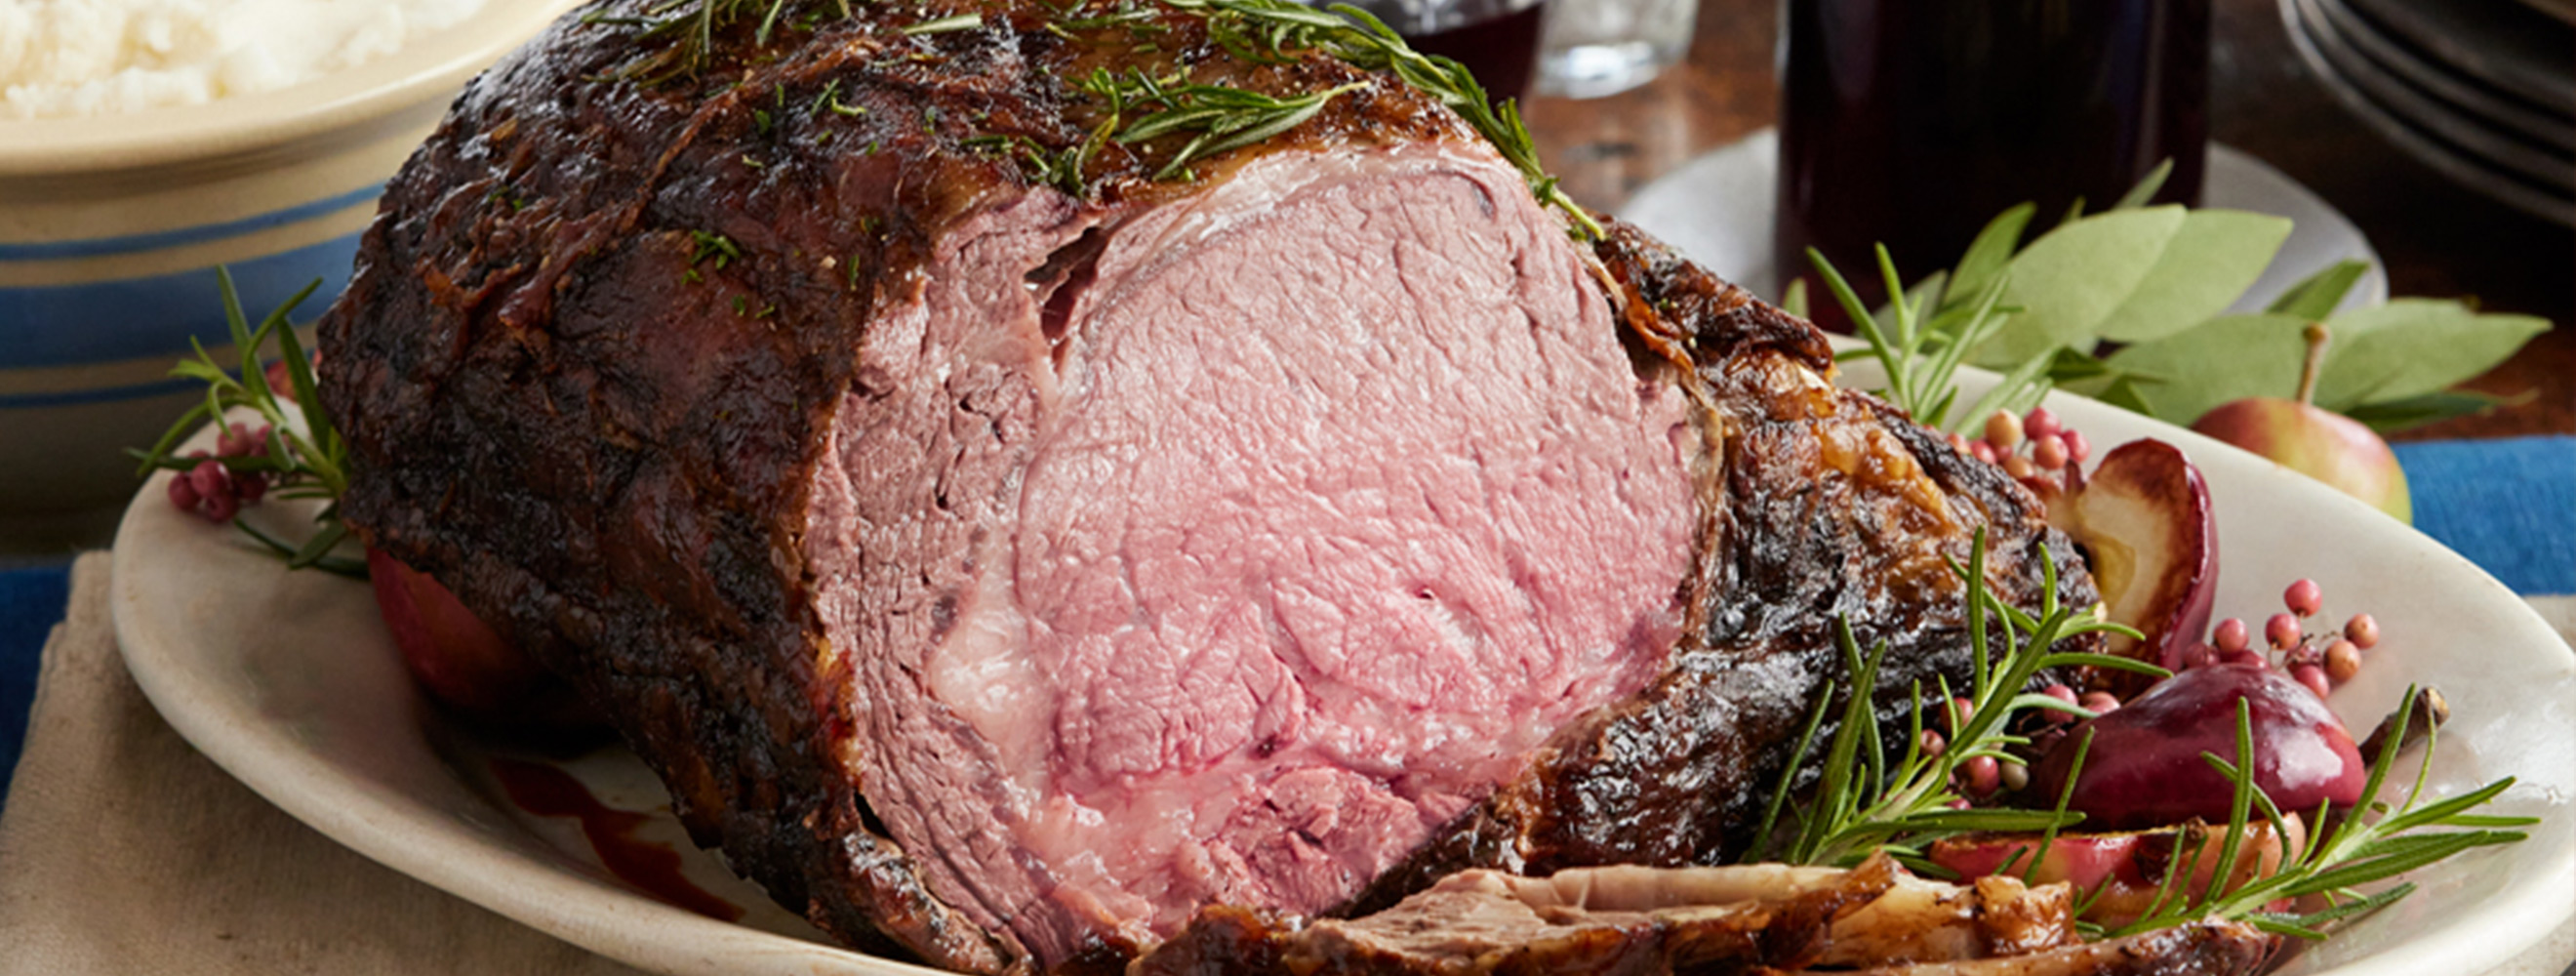 Holiday prime rib roast of beef on a serving platter.